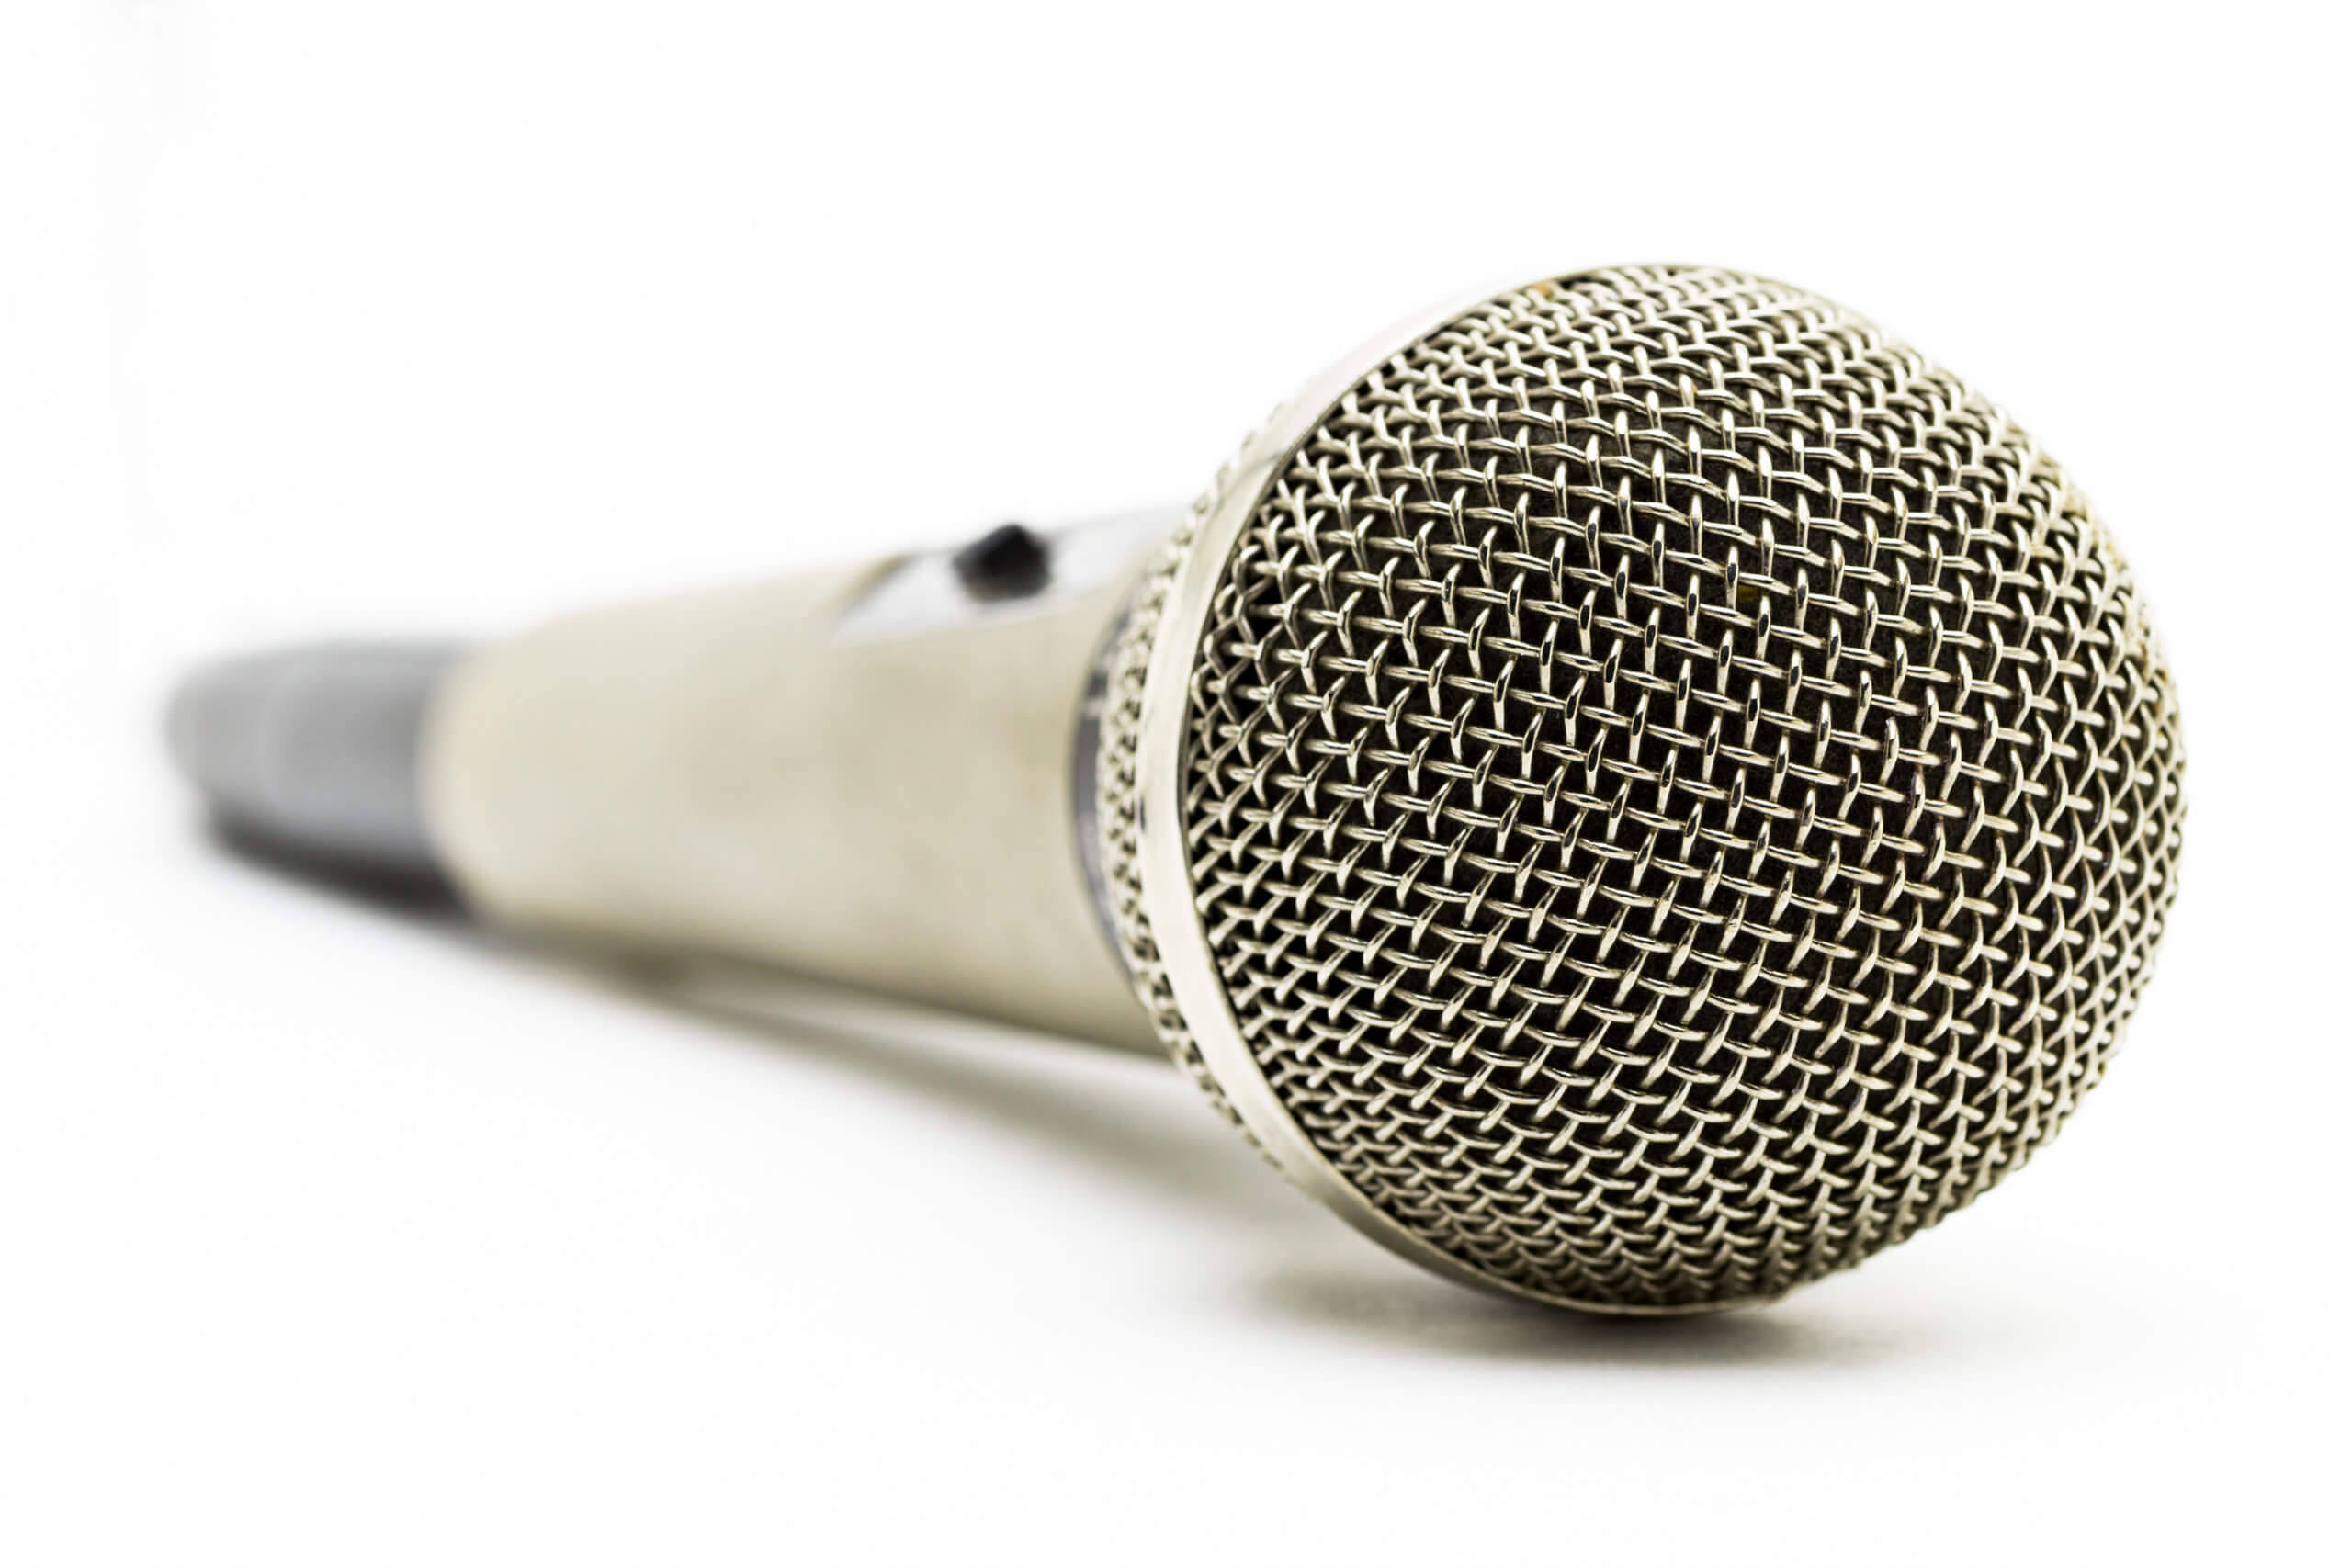 A silver studio microphone on a white background